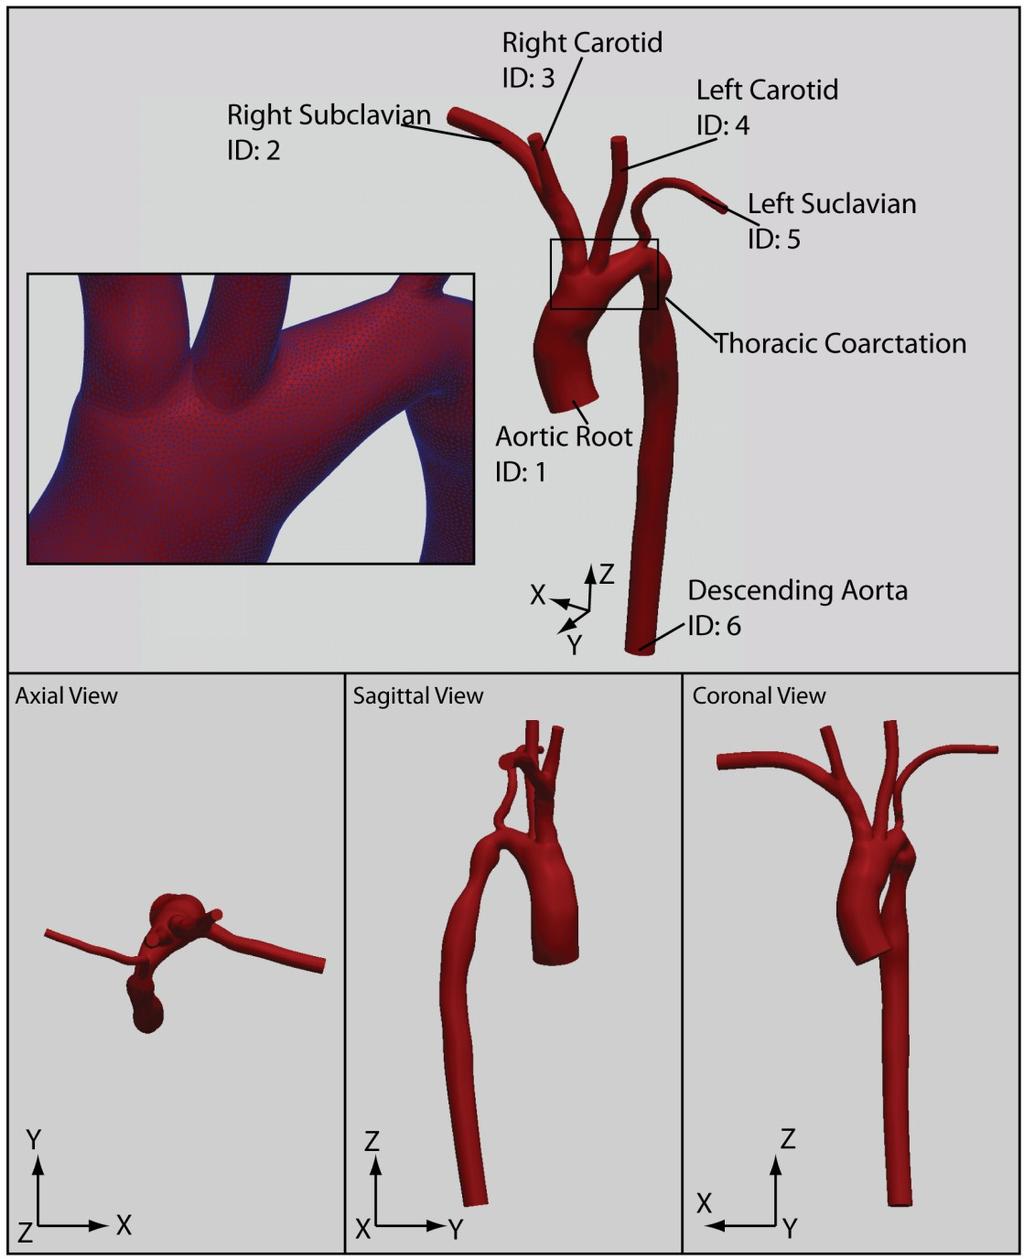 Model Geometry and Physiologic Data The subject was 8-year old female patient with a moderate thoracic aortic coarctation (approximately 65% area reduction) whose body surface area (BSA) was 0.94 m 2.